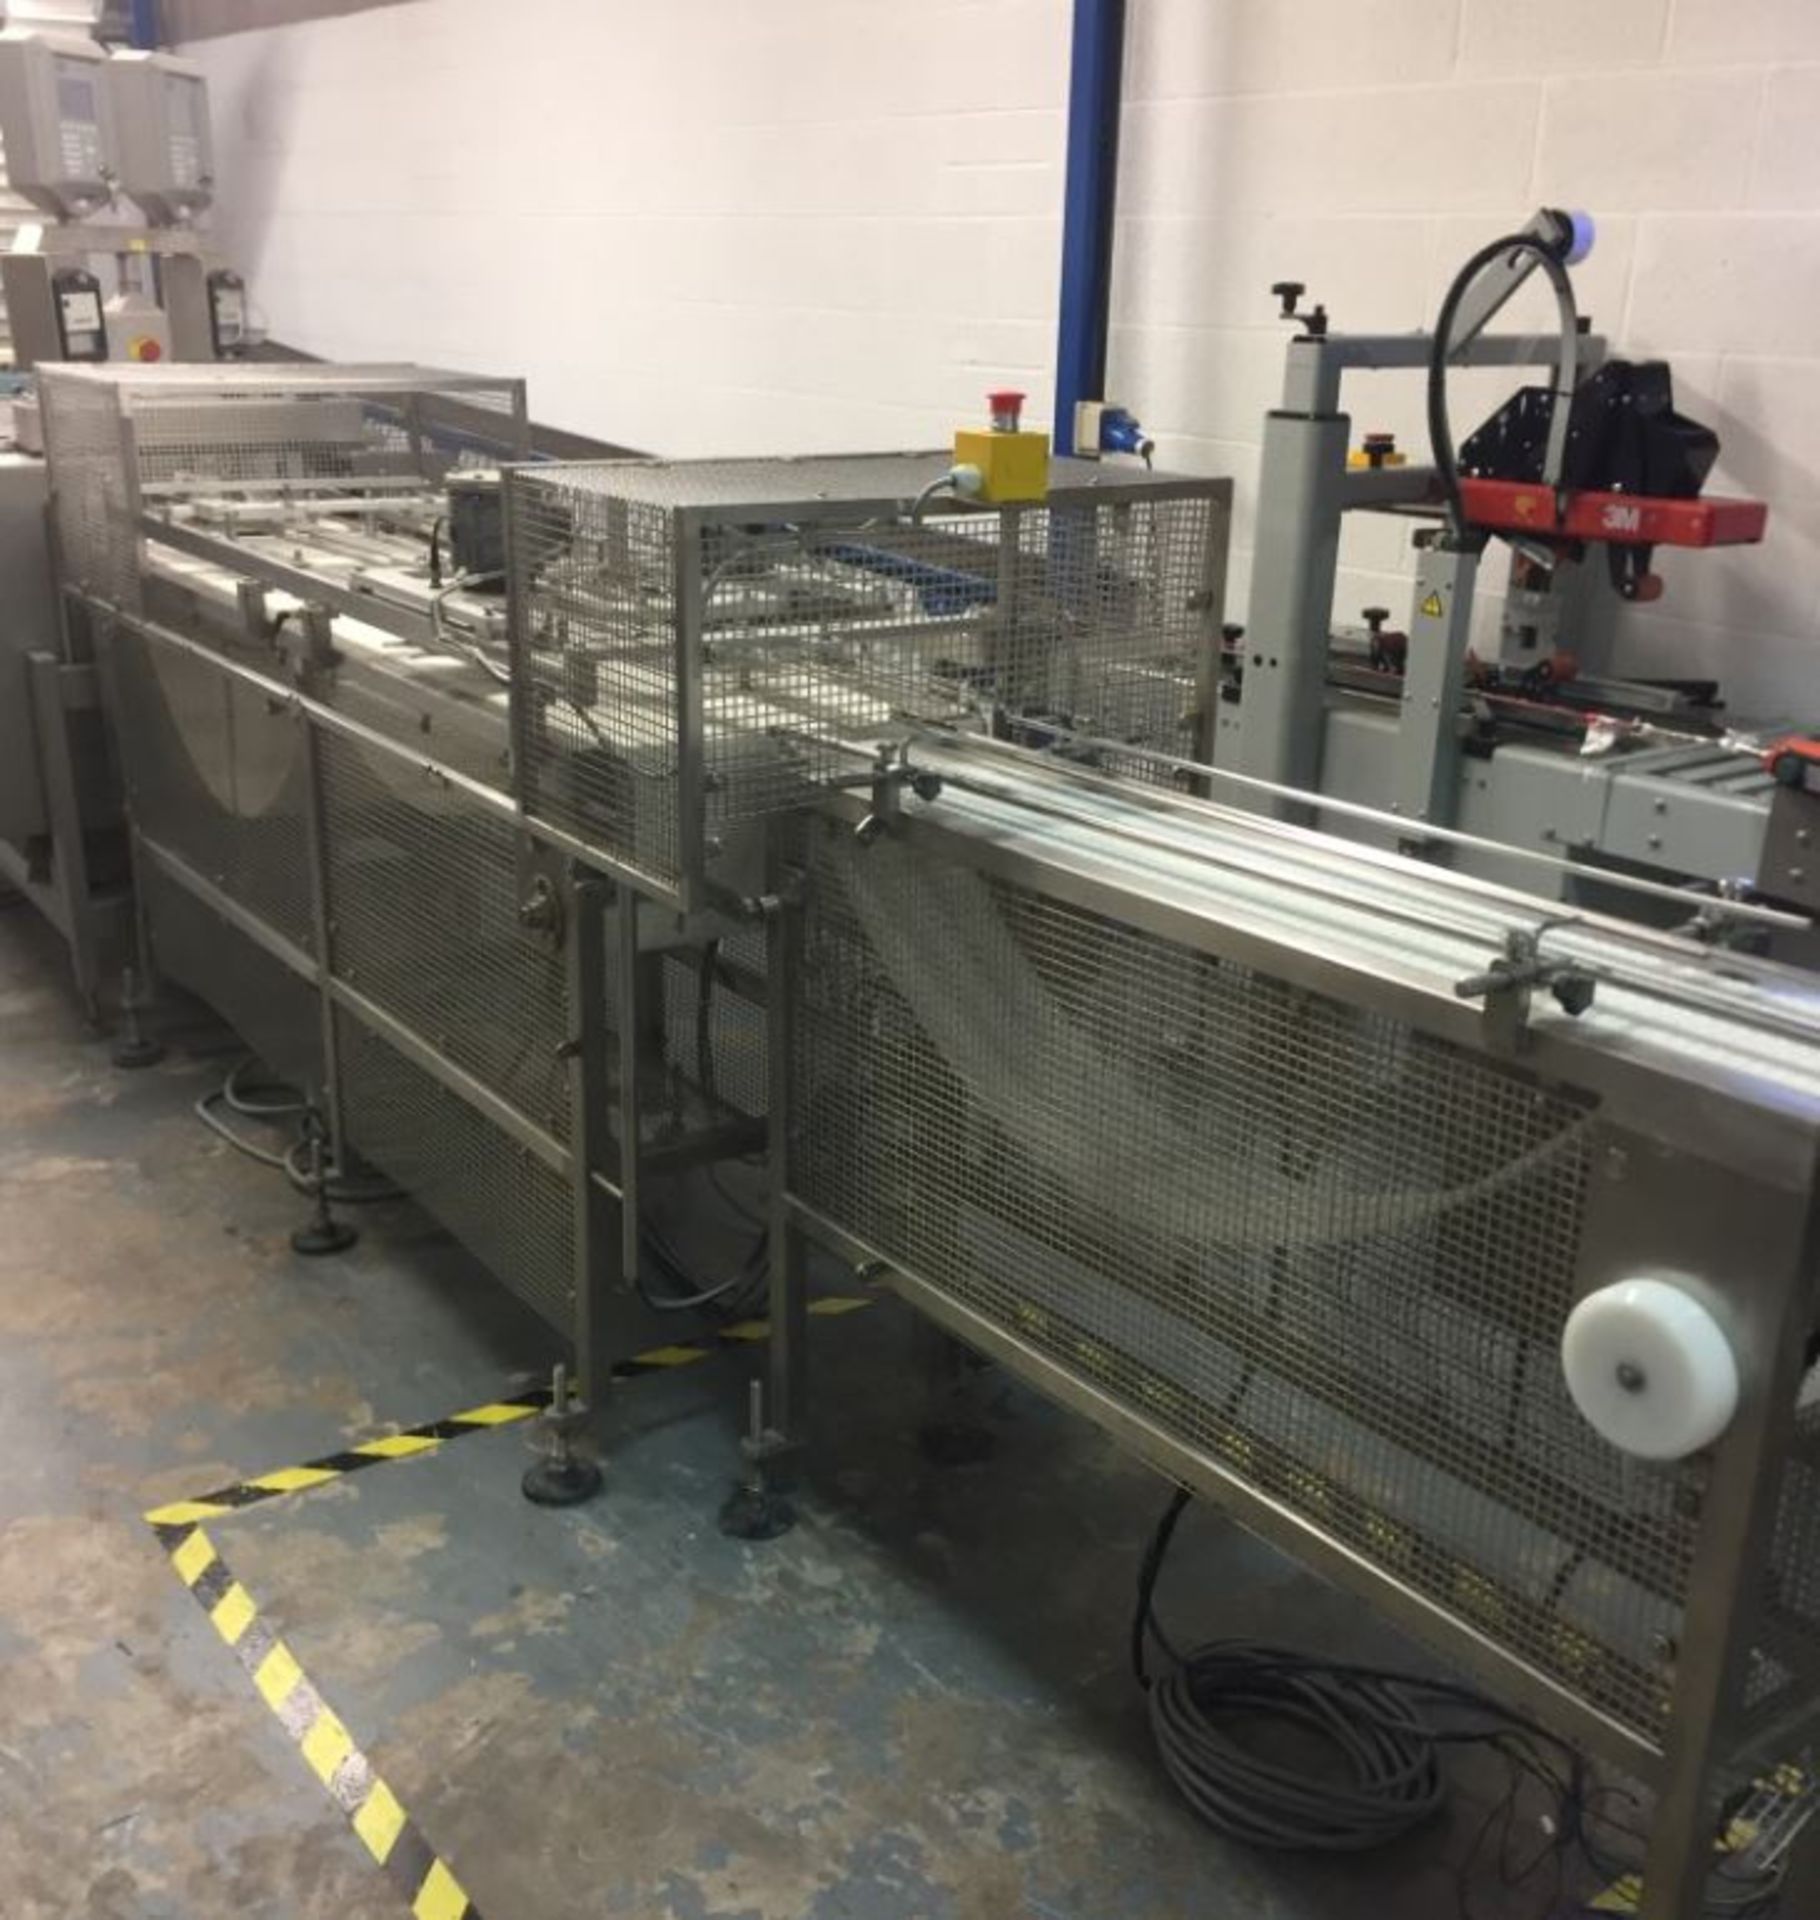 WARD-BEKKER TWIN CHECK-WEIGHER/METAL DETAL DETECTOR WITH FORTRESS METAL DETECTOR AND CONVEYORS - Image 3 of 20